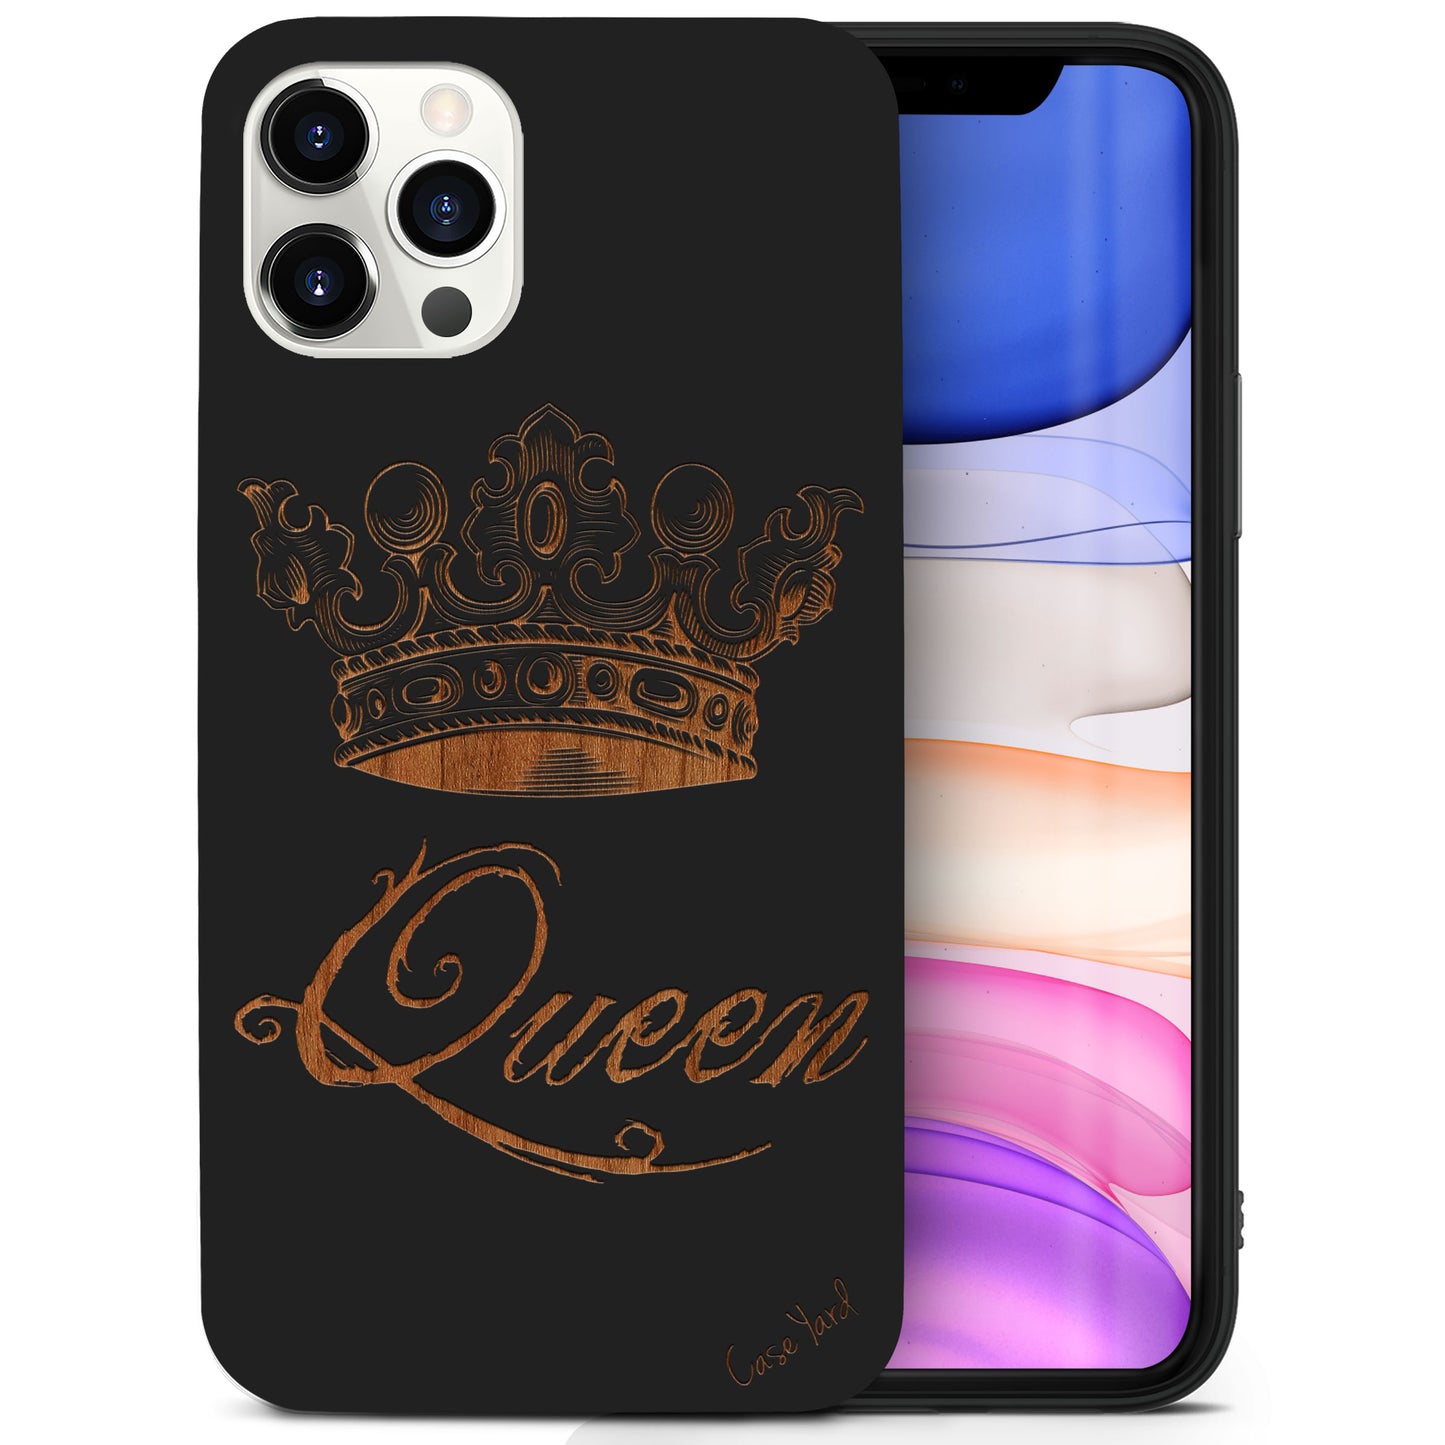 Wooden Cell Phone Case Cover, Laser Engraved case for iPhone & Samsung phone Queen Crown Design